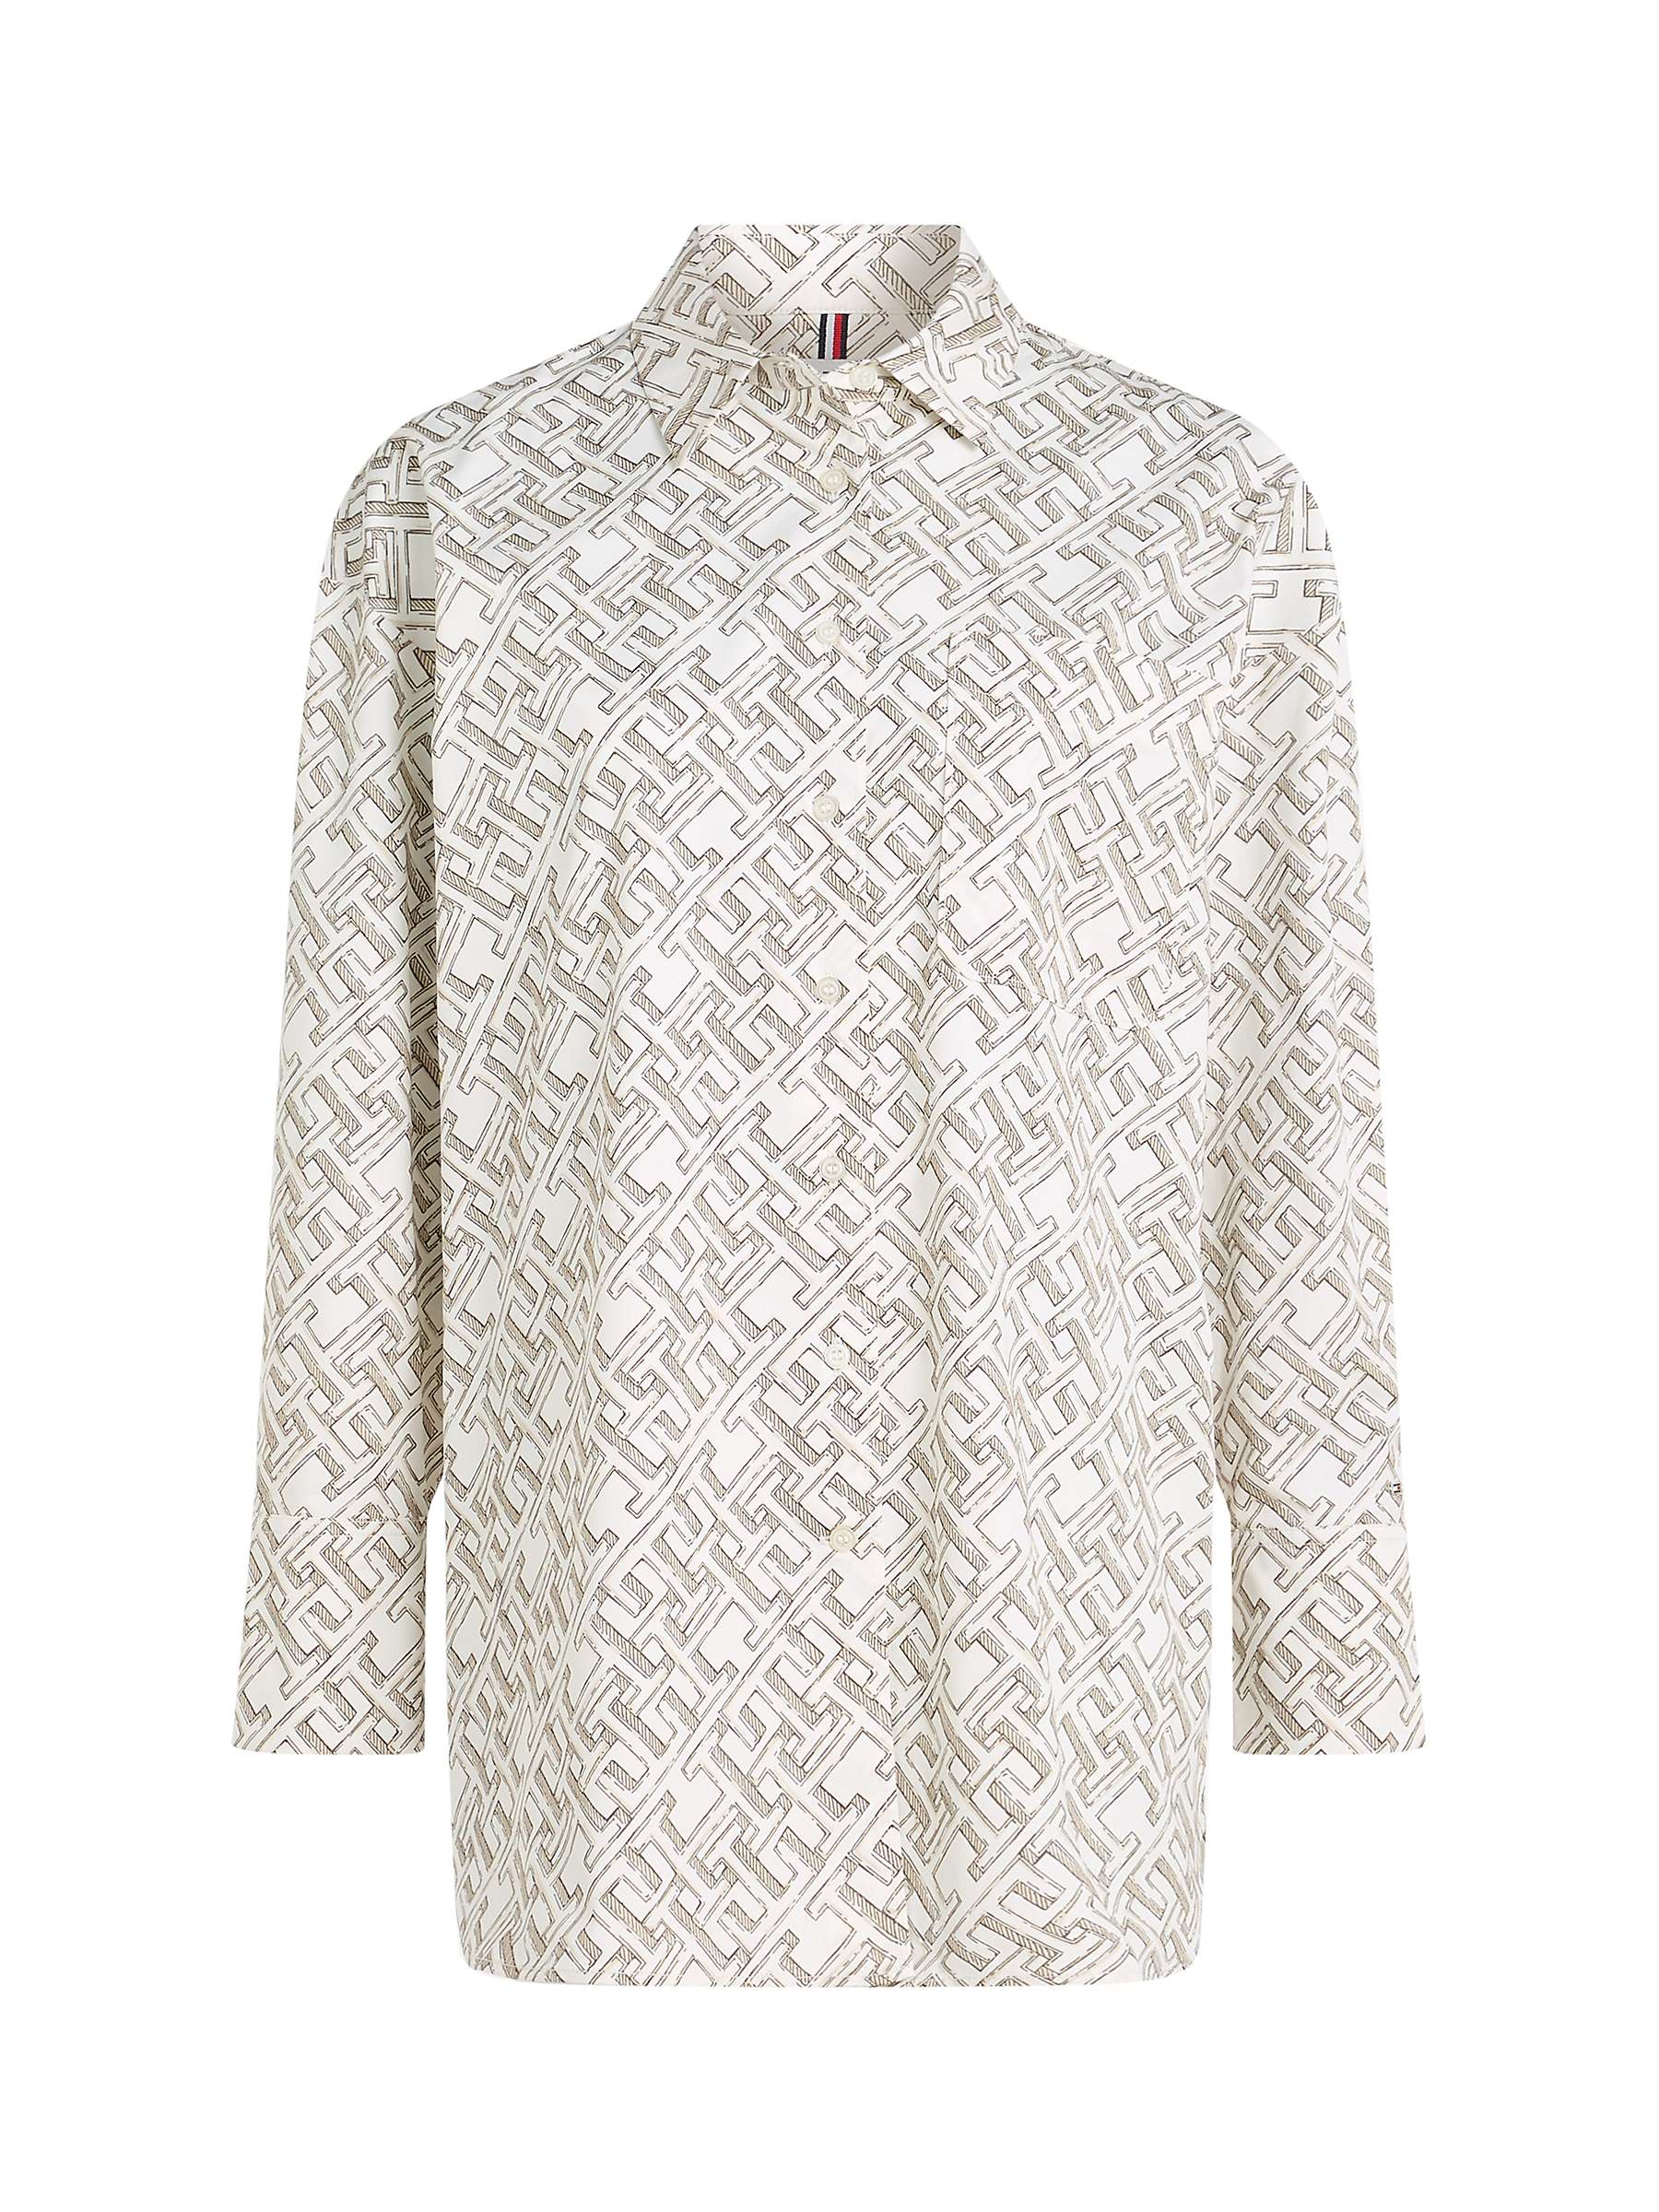 Buy Tommy Hilfiger Relaxed Print Shirt, Illustrated White Online at johnlewis.com